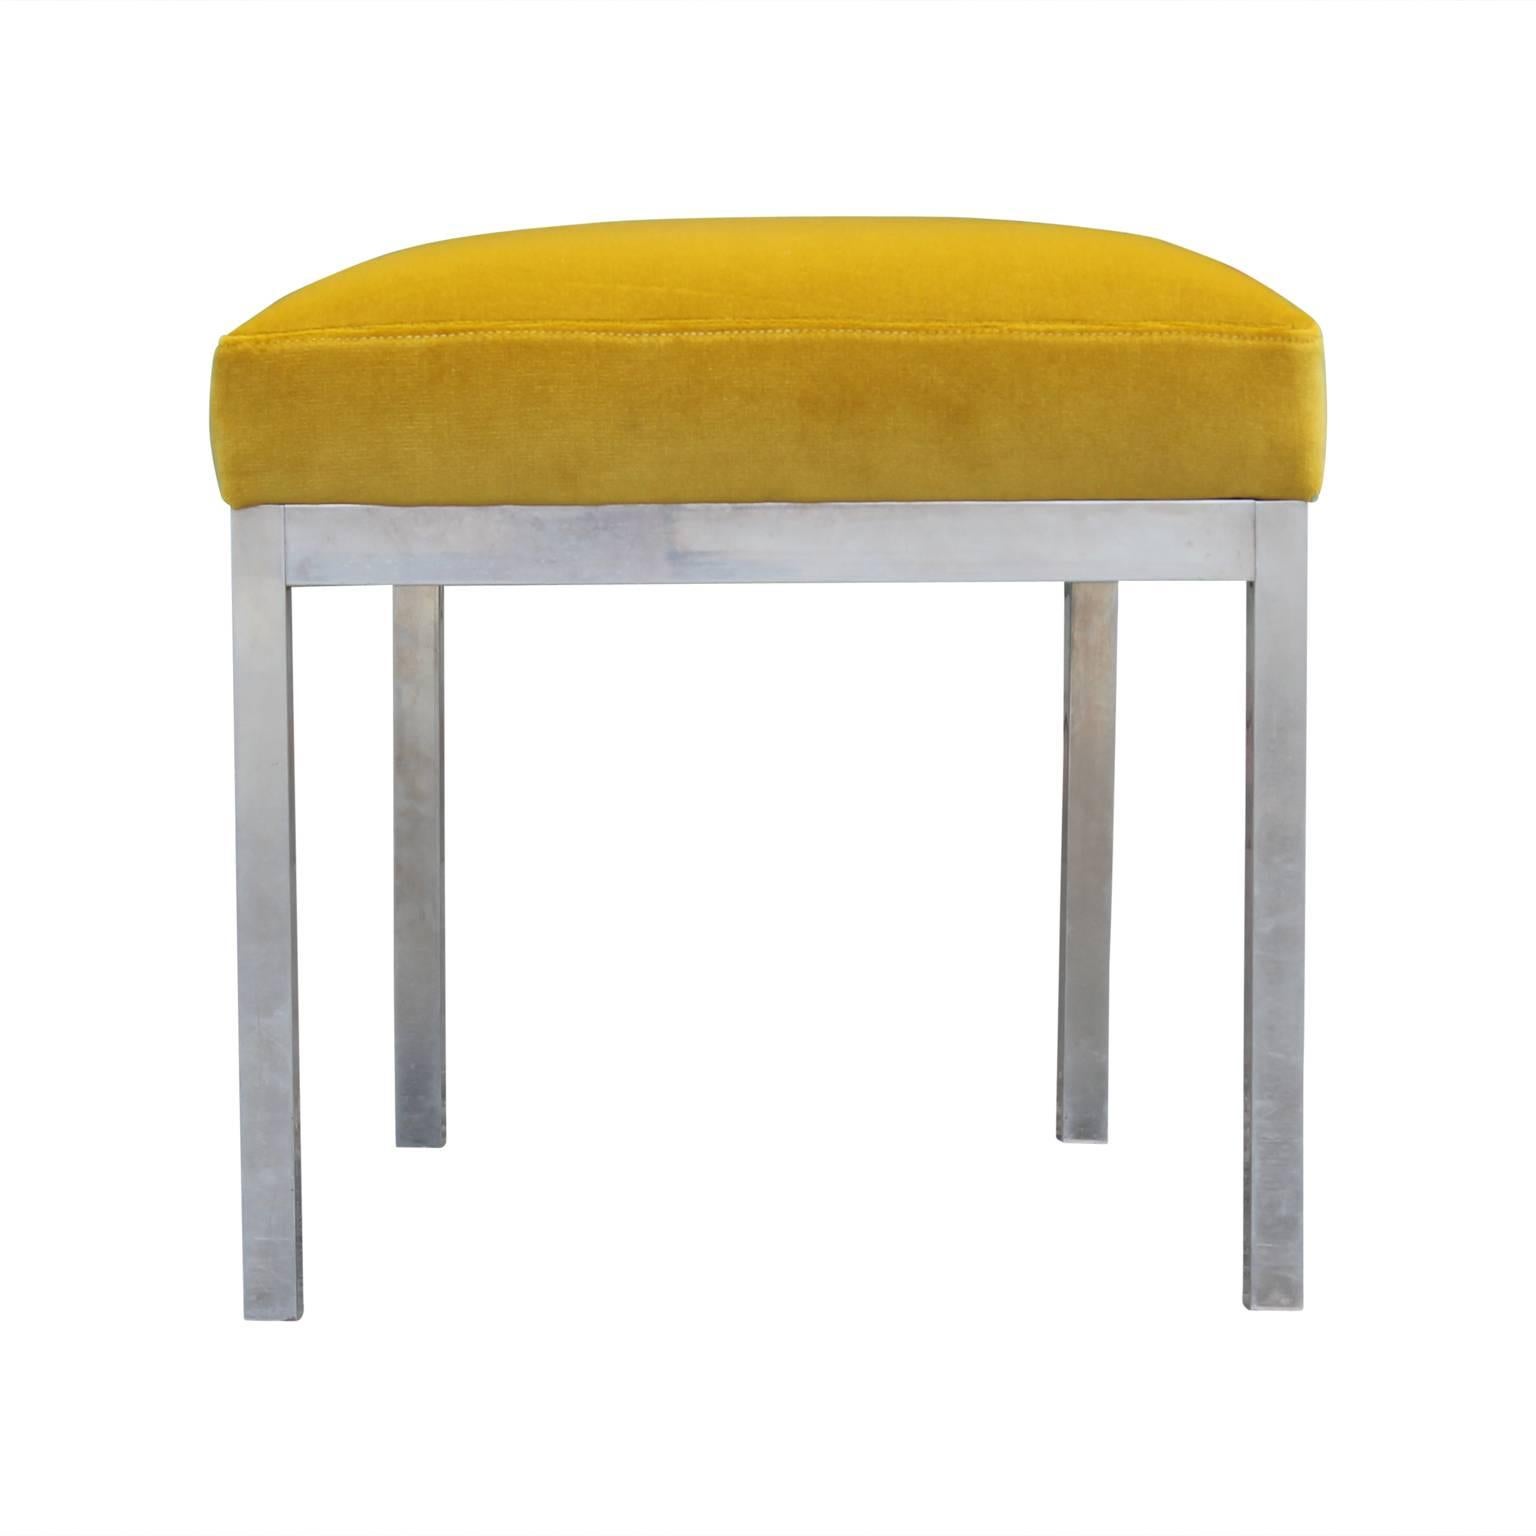 Pair of unique polished aluminum trapezoid footstools ottomans attributed to Milo Baughman or Design Institute of America. Recently reupholstered in gorgeous yellow velvet.